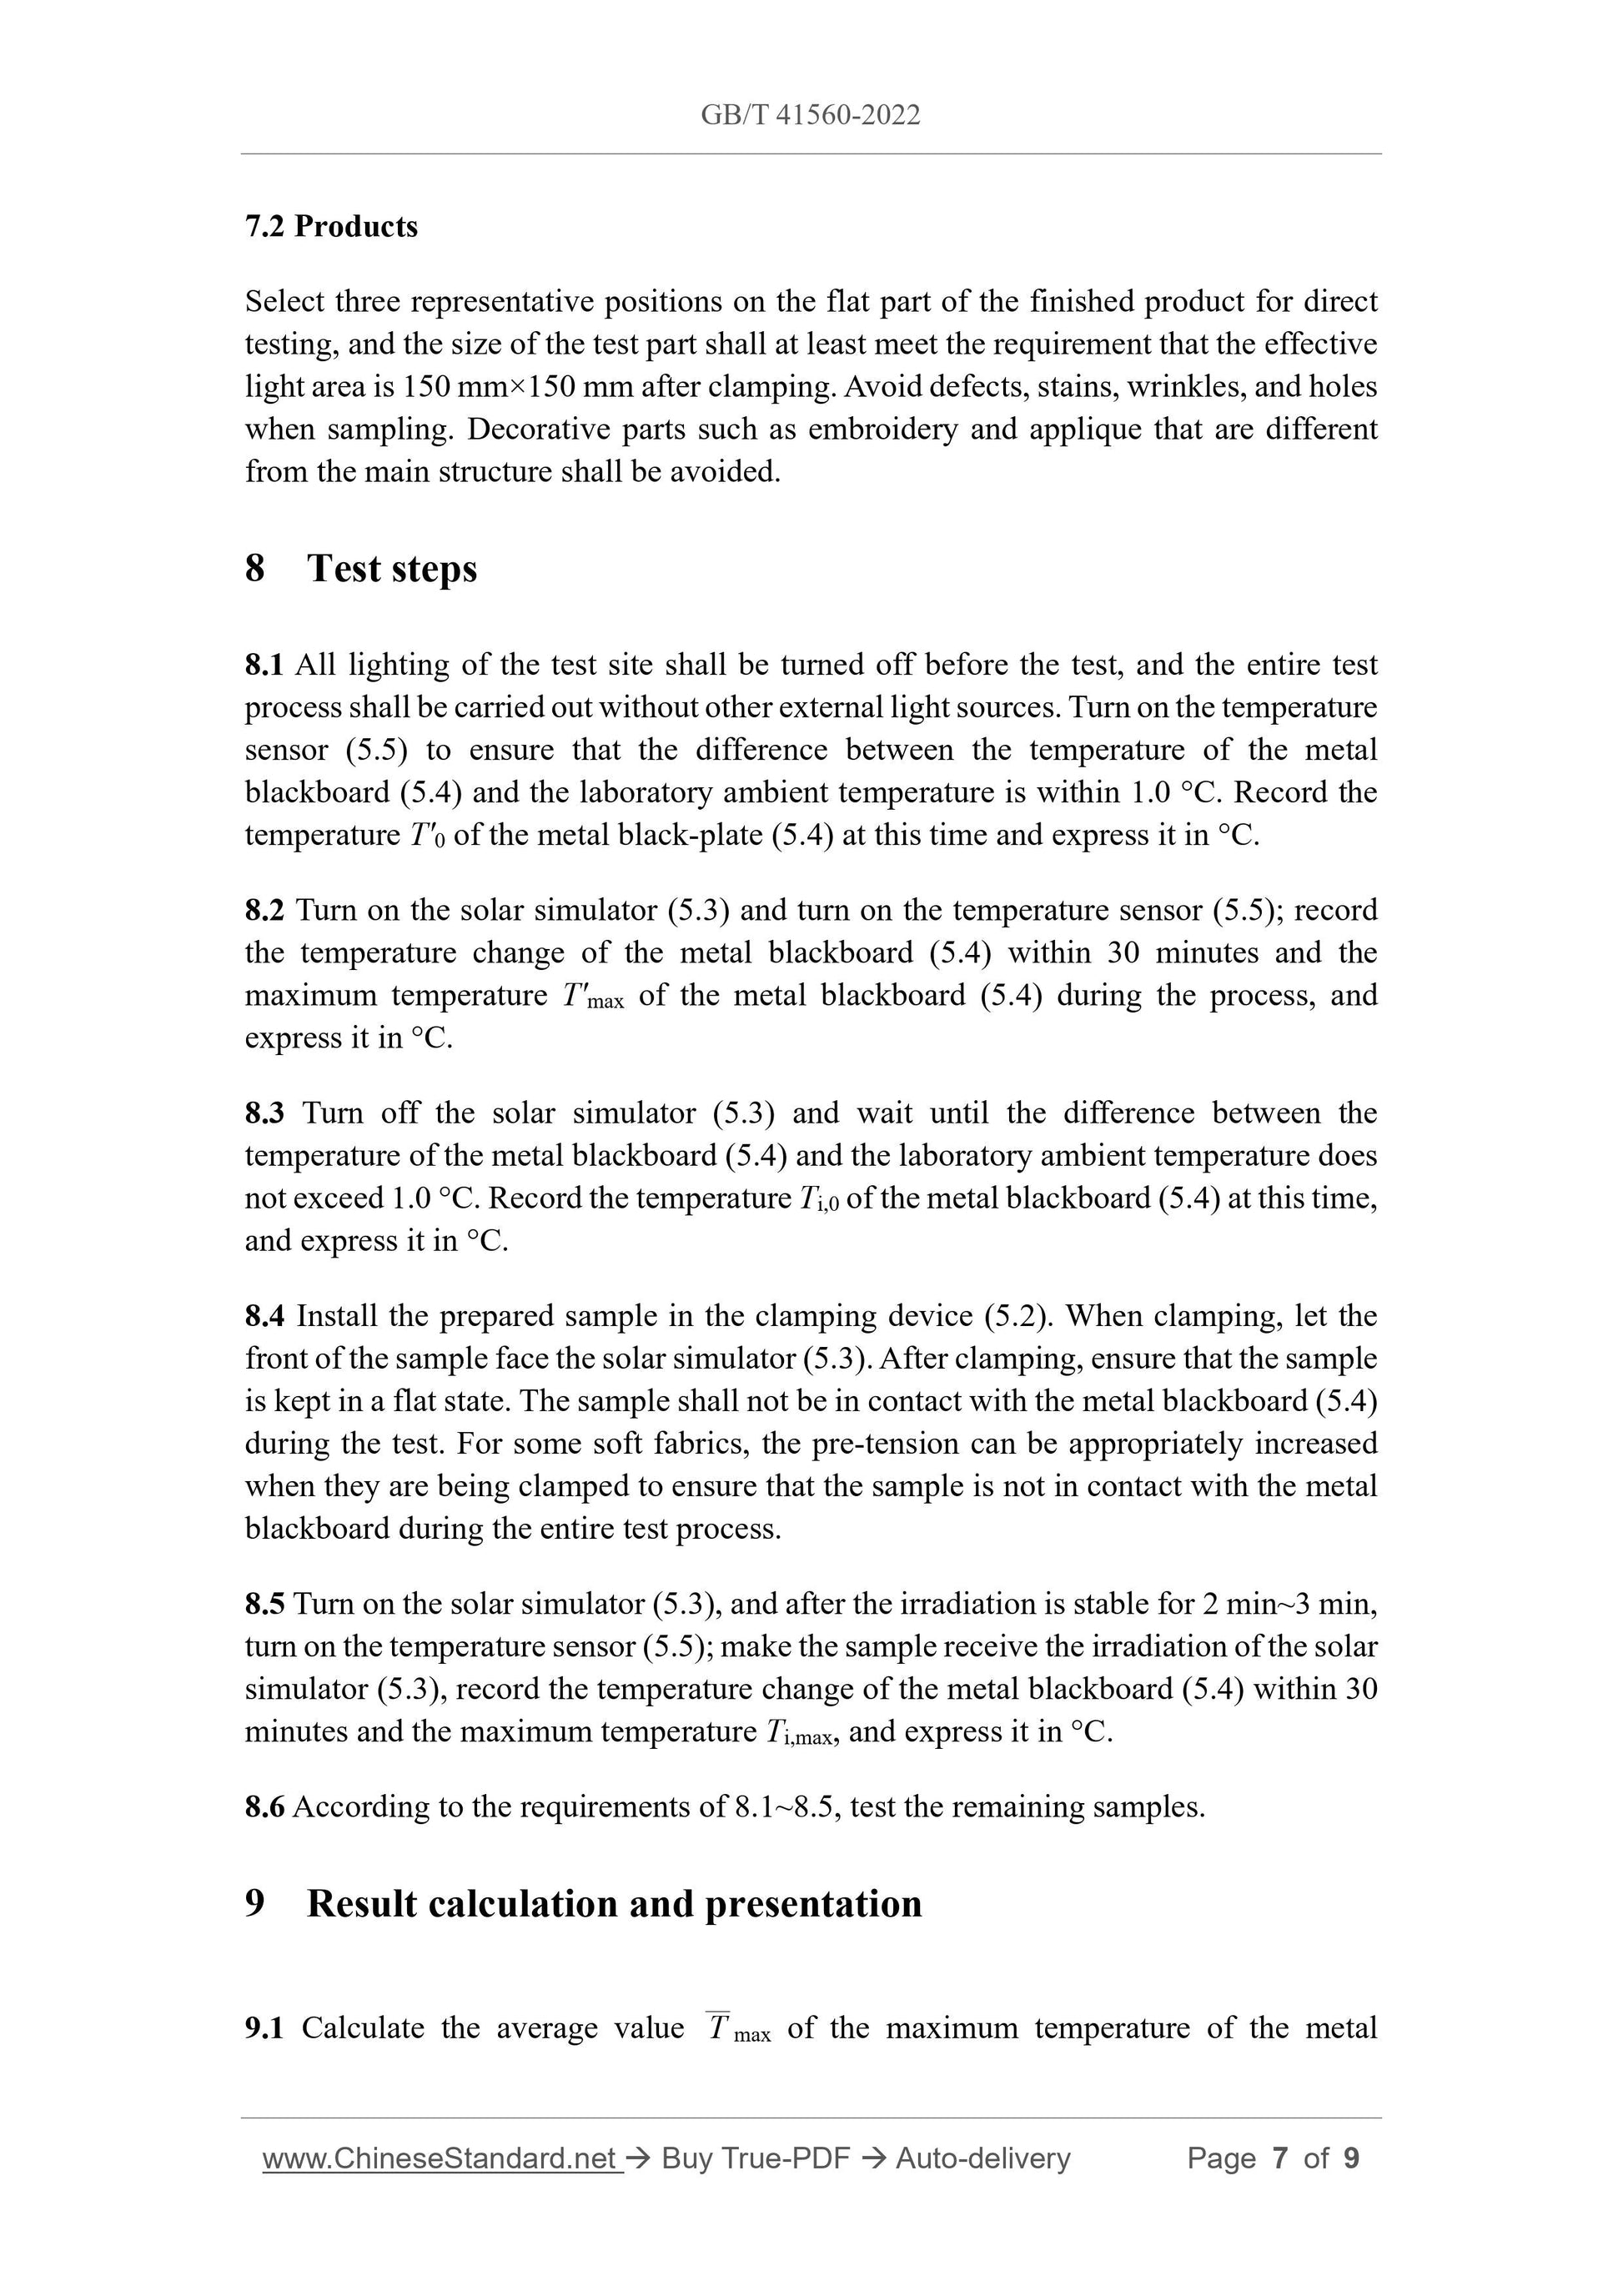 GB/T 41560-2022 Page 5